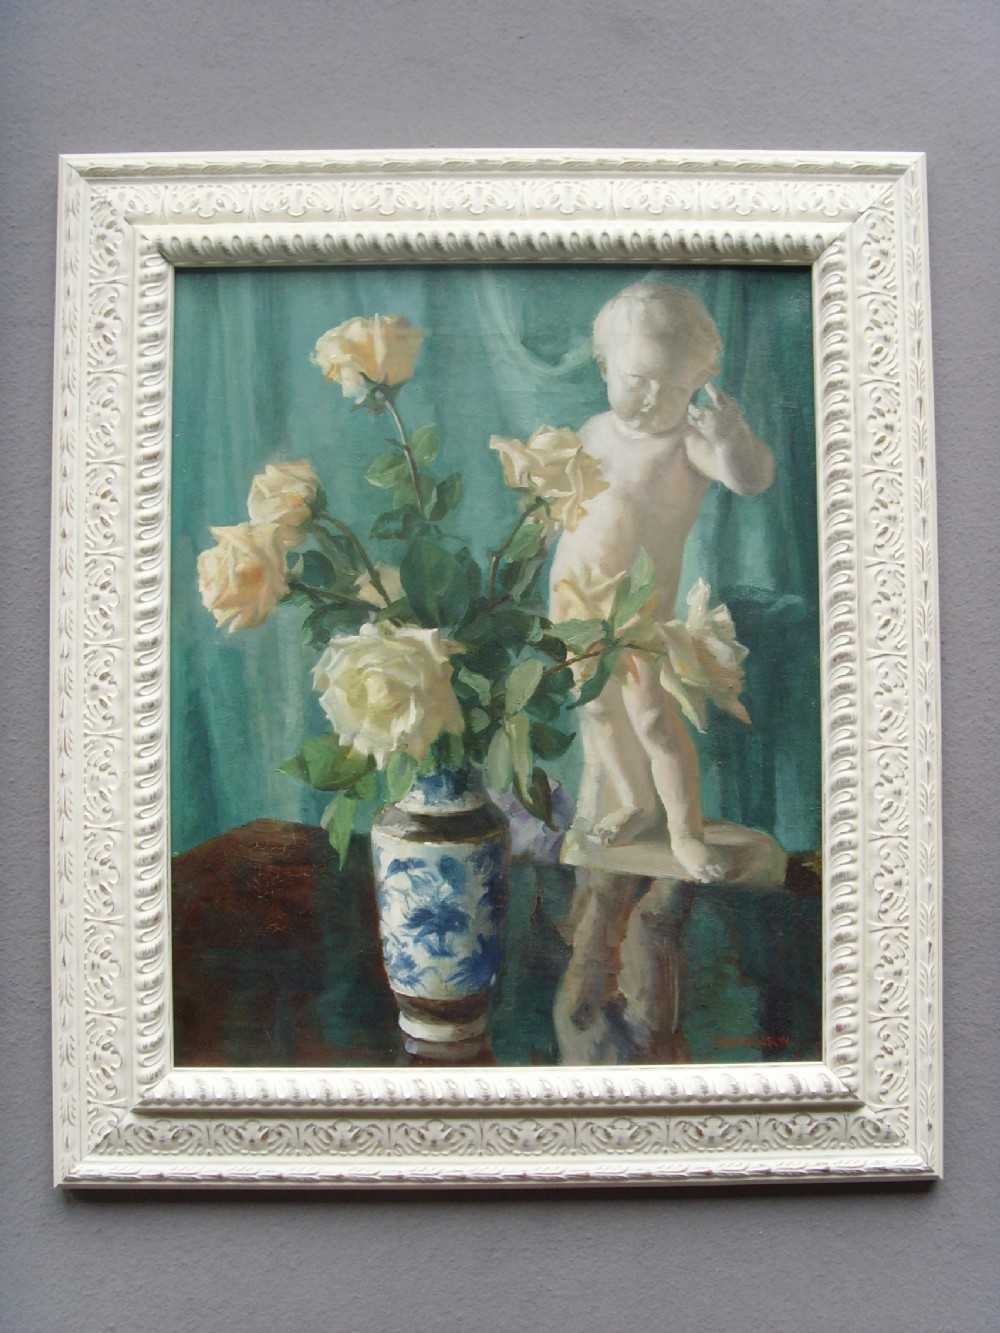 fine florrel still life oil painting by montague jackson of cream roses with a cherub statuette standing on a table 26 x 22 inches